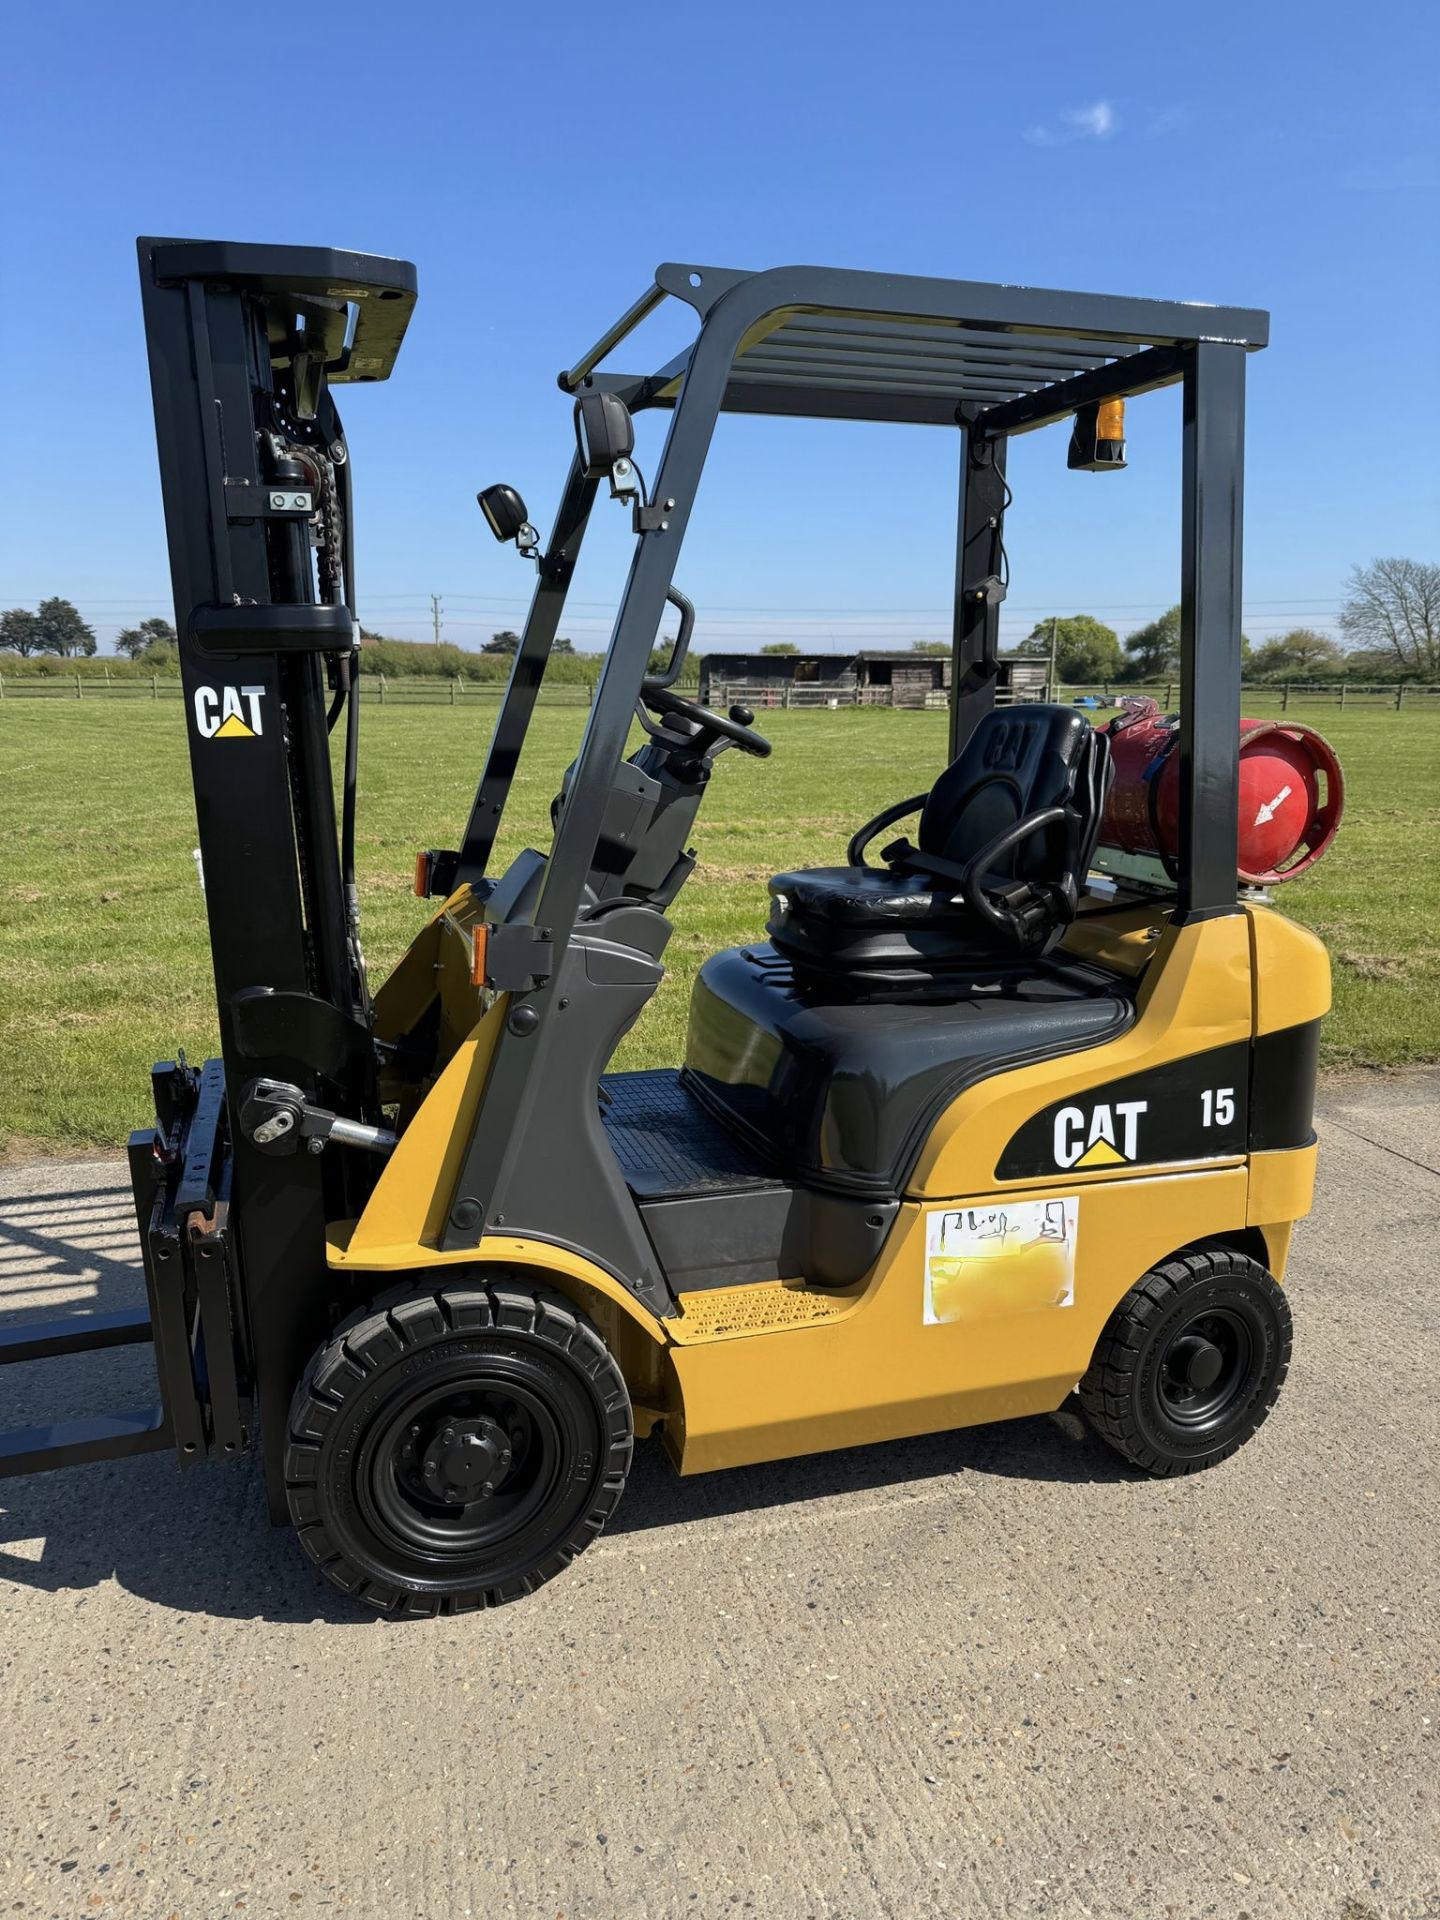 2016, CATERPILLAR - 1.5 Tonne Gas Forklift (Container / Triple Mast) - 3400 Hours - Image 2 of 7